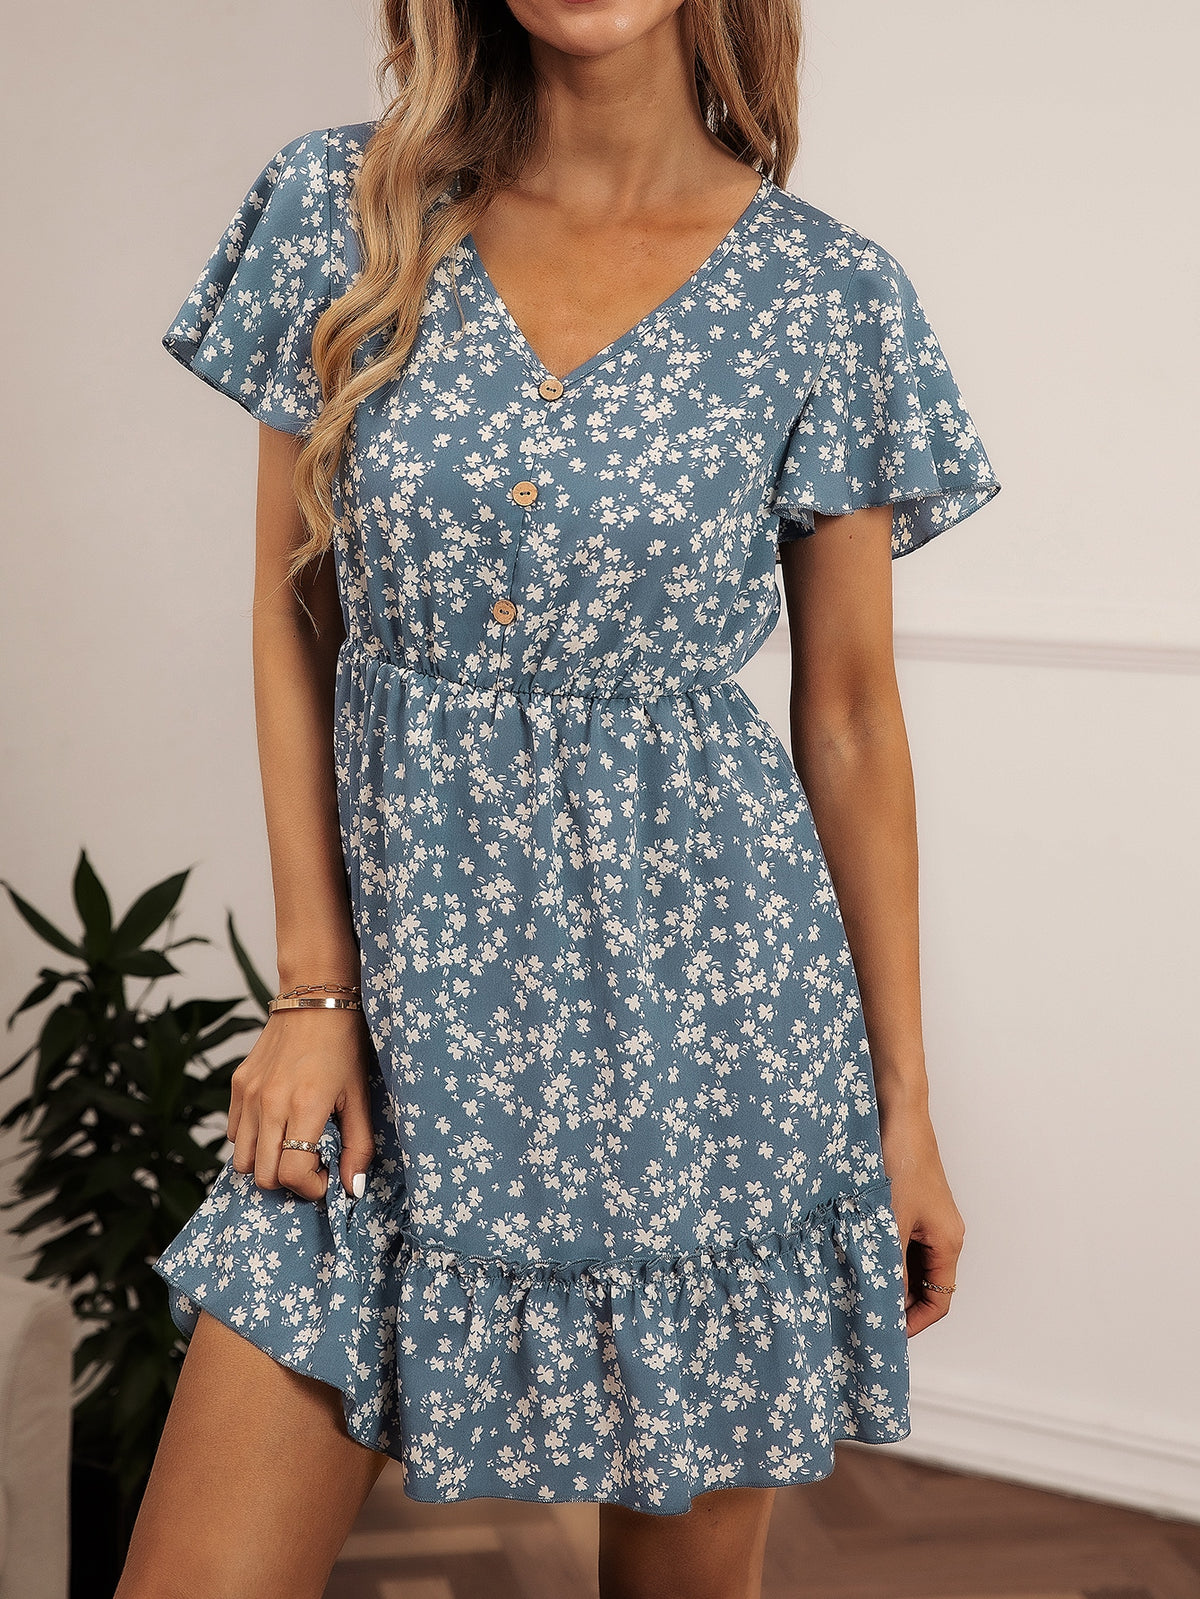 Floral Print Dress with Ruffle - 